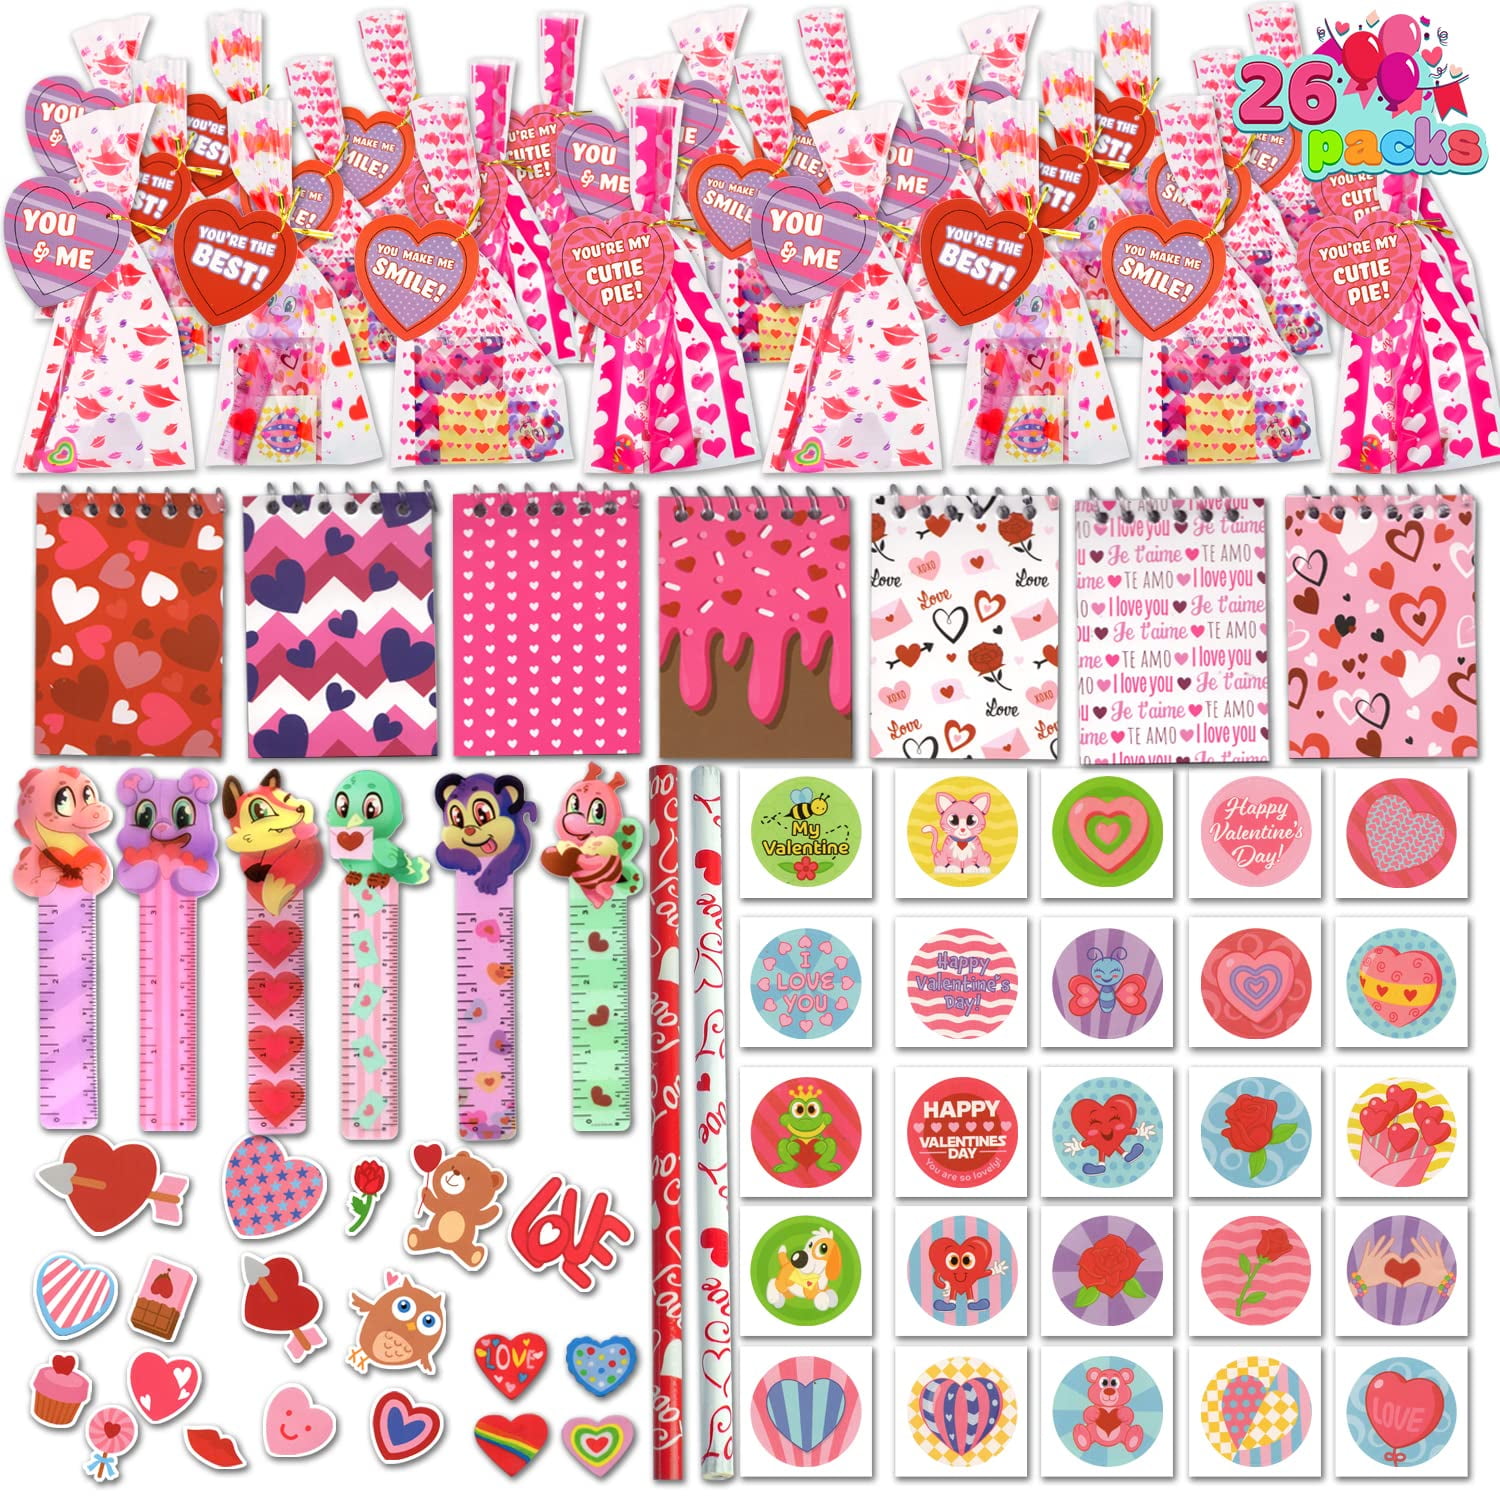 JOYIN 28 Pack Valentines Day Stationery Set with Treat Bags for Kids Party Favor, Classroom Exchange prizes?includes notebooks,rule